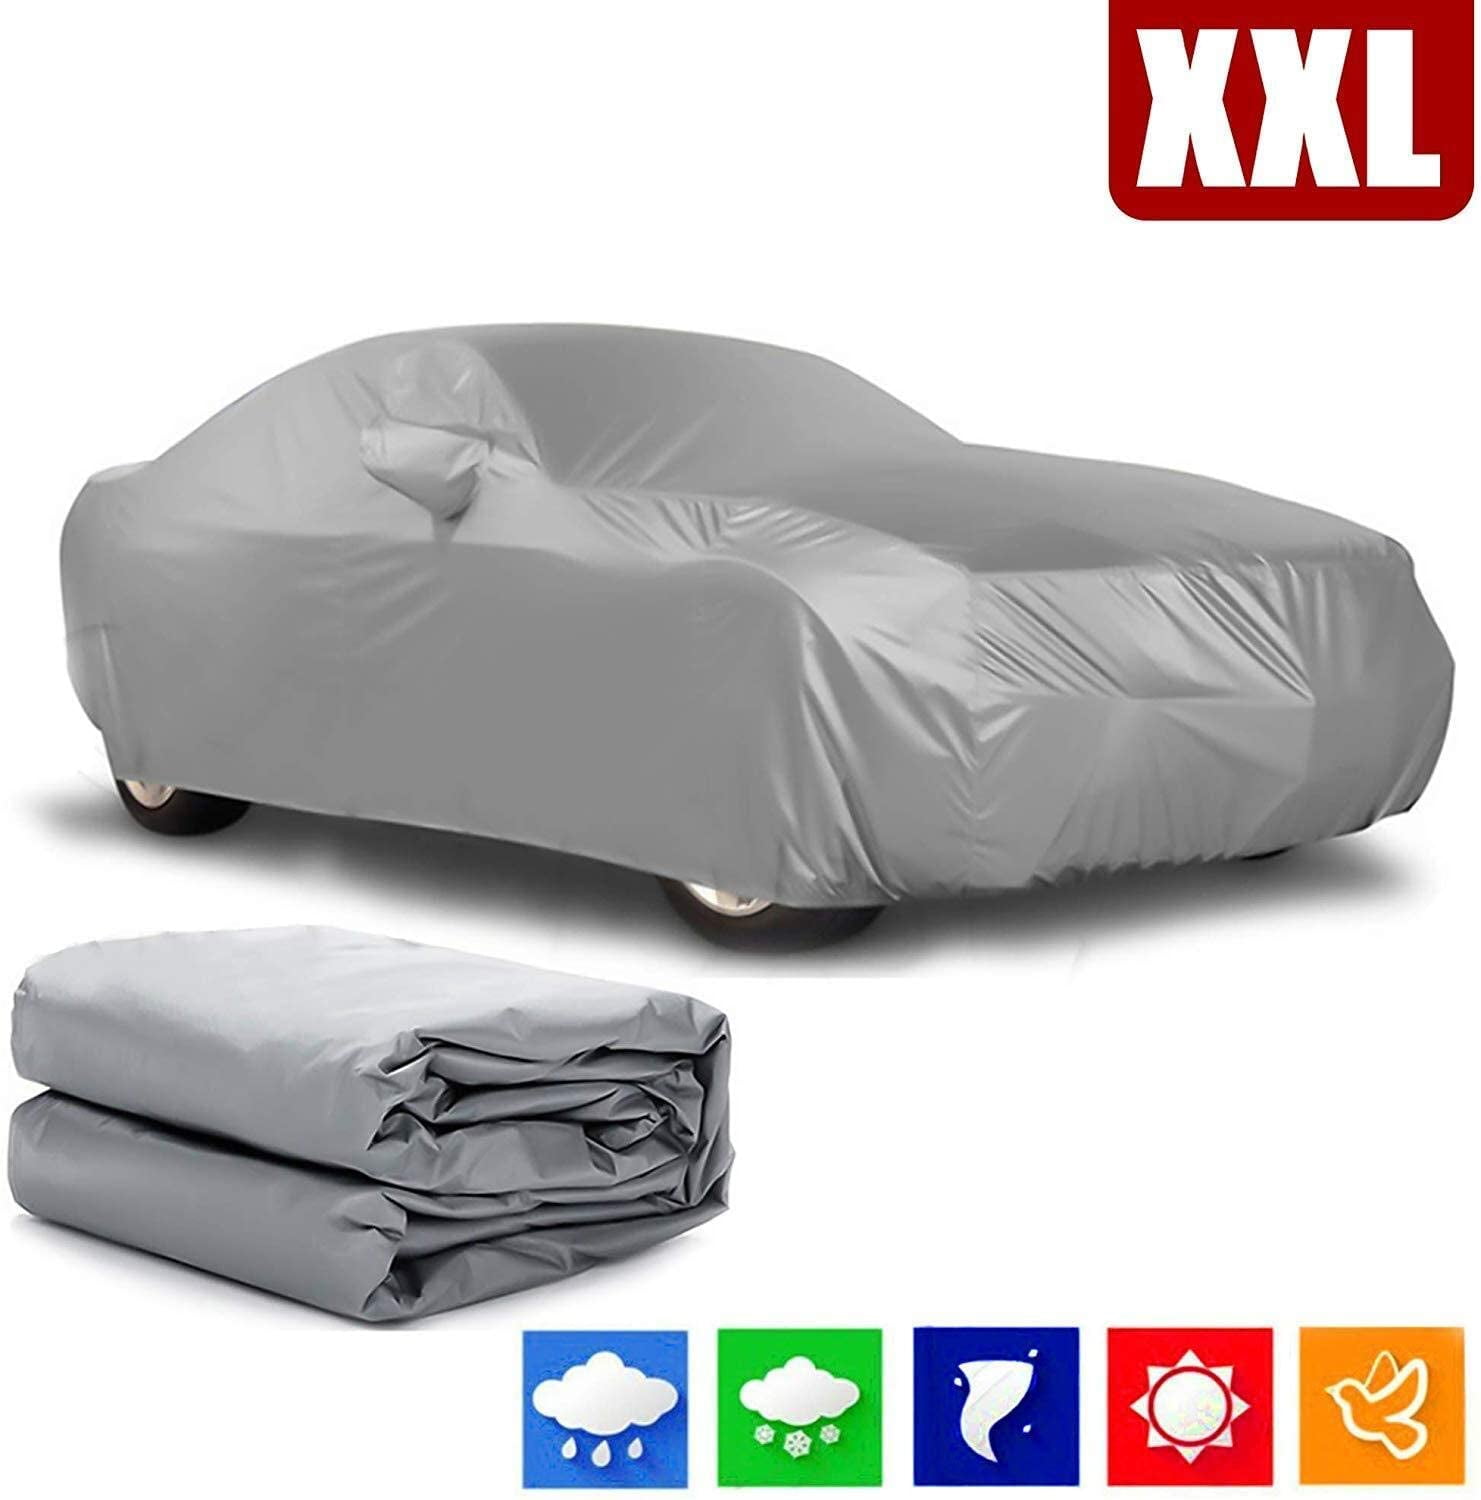 All Weather Car Cover is Lightweight, Breathable & Waterproof and Will  Protect Your Vehicle 